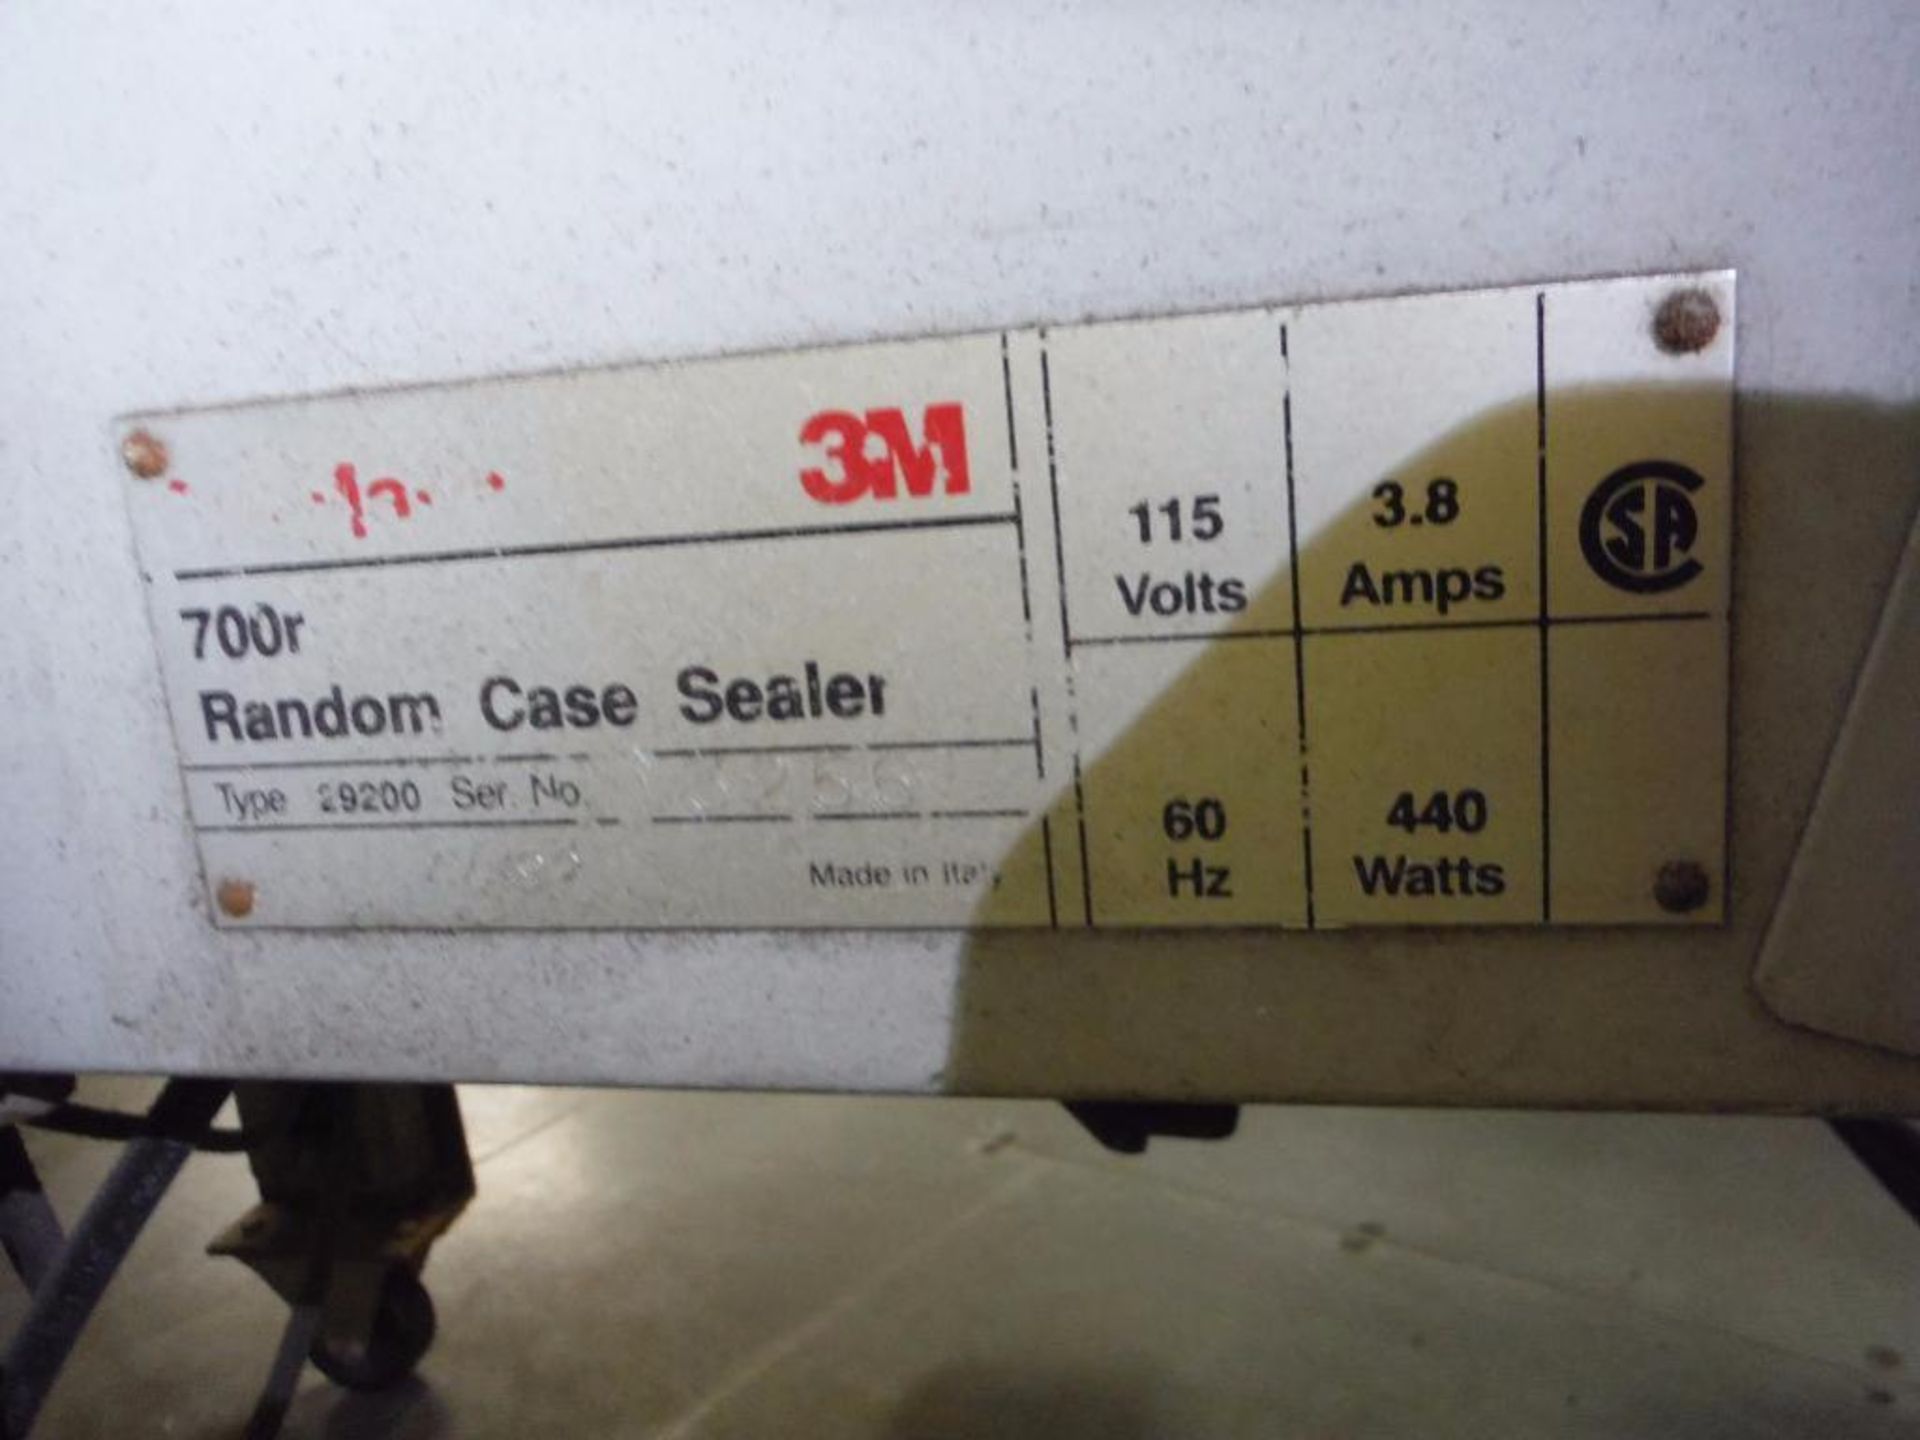 3M matic case sealer, Type 29200, Model 700R, SN 3256, top and bottom ** Rigging Fee: $150 ** - Image 5 of 8